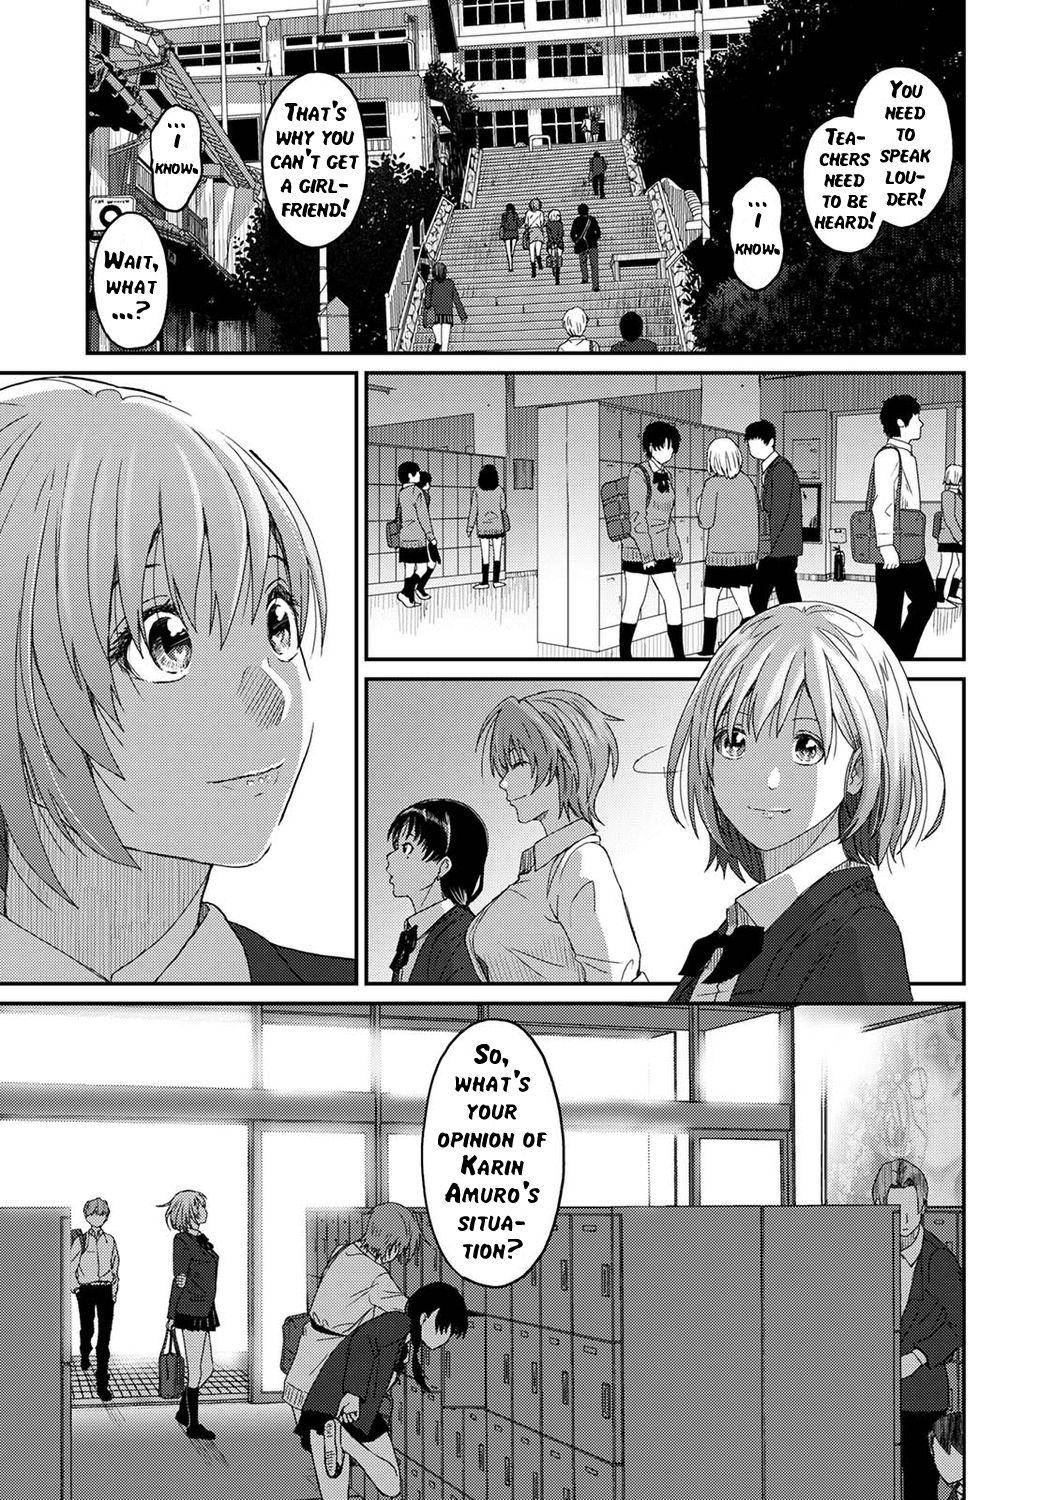 Russian Itaiamai - Chapter 1 Twink - Page 6